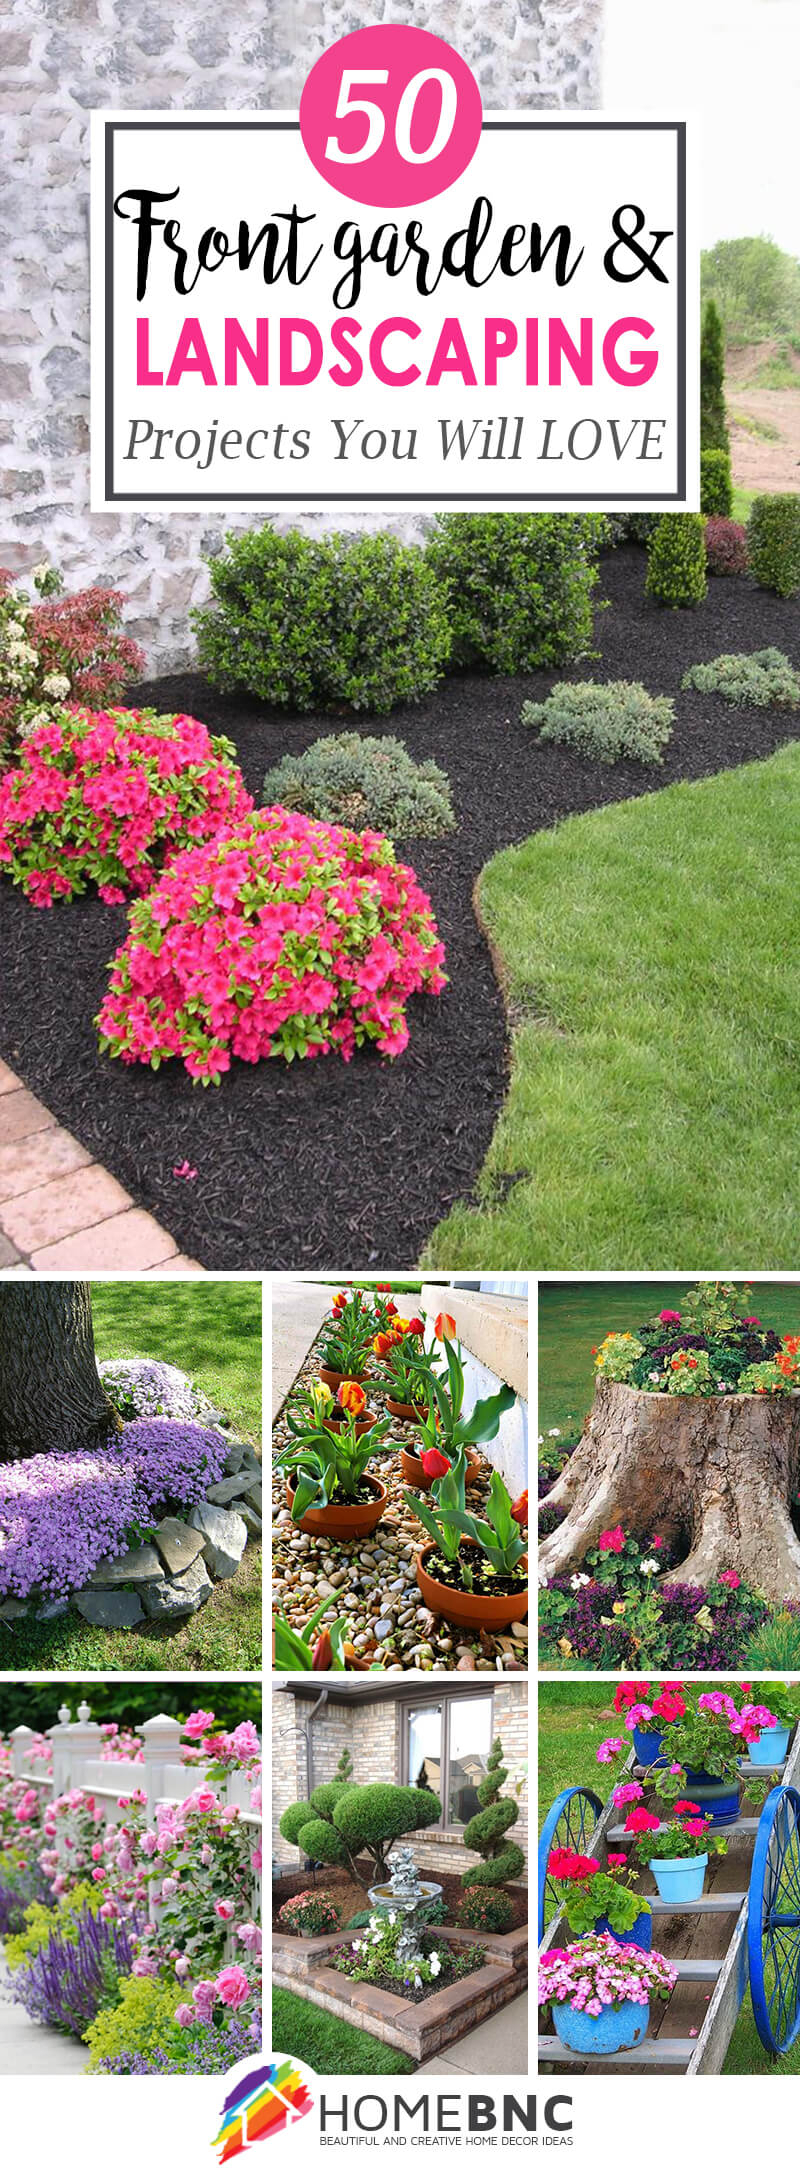 10 Lovely Flower Beds Ideas Front Yard 50 best front yard landscaping ideas and garden designs for 2019 1 2022